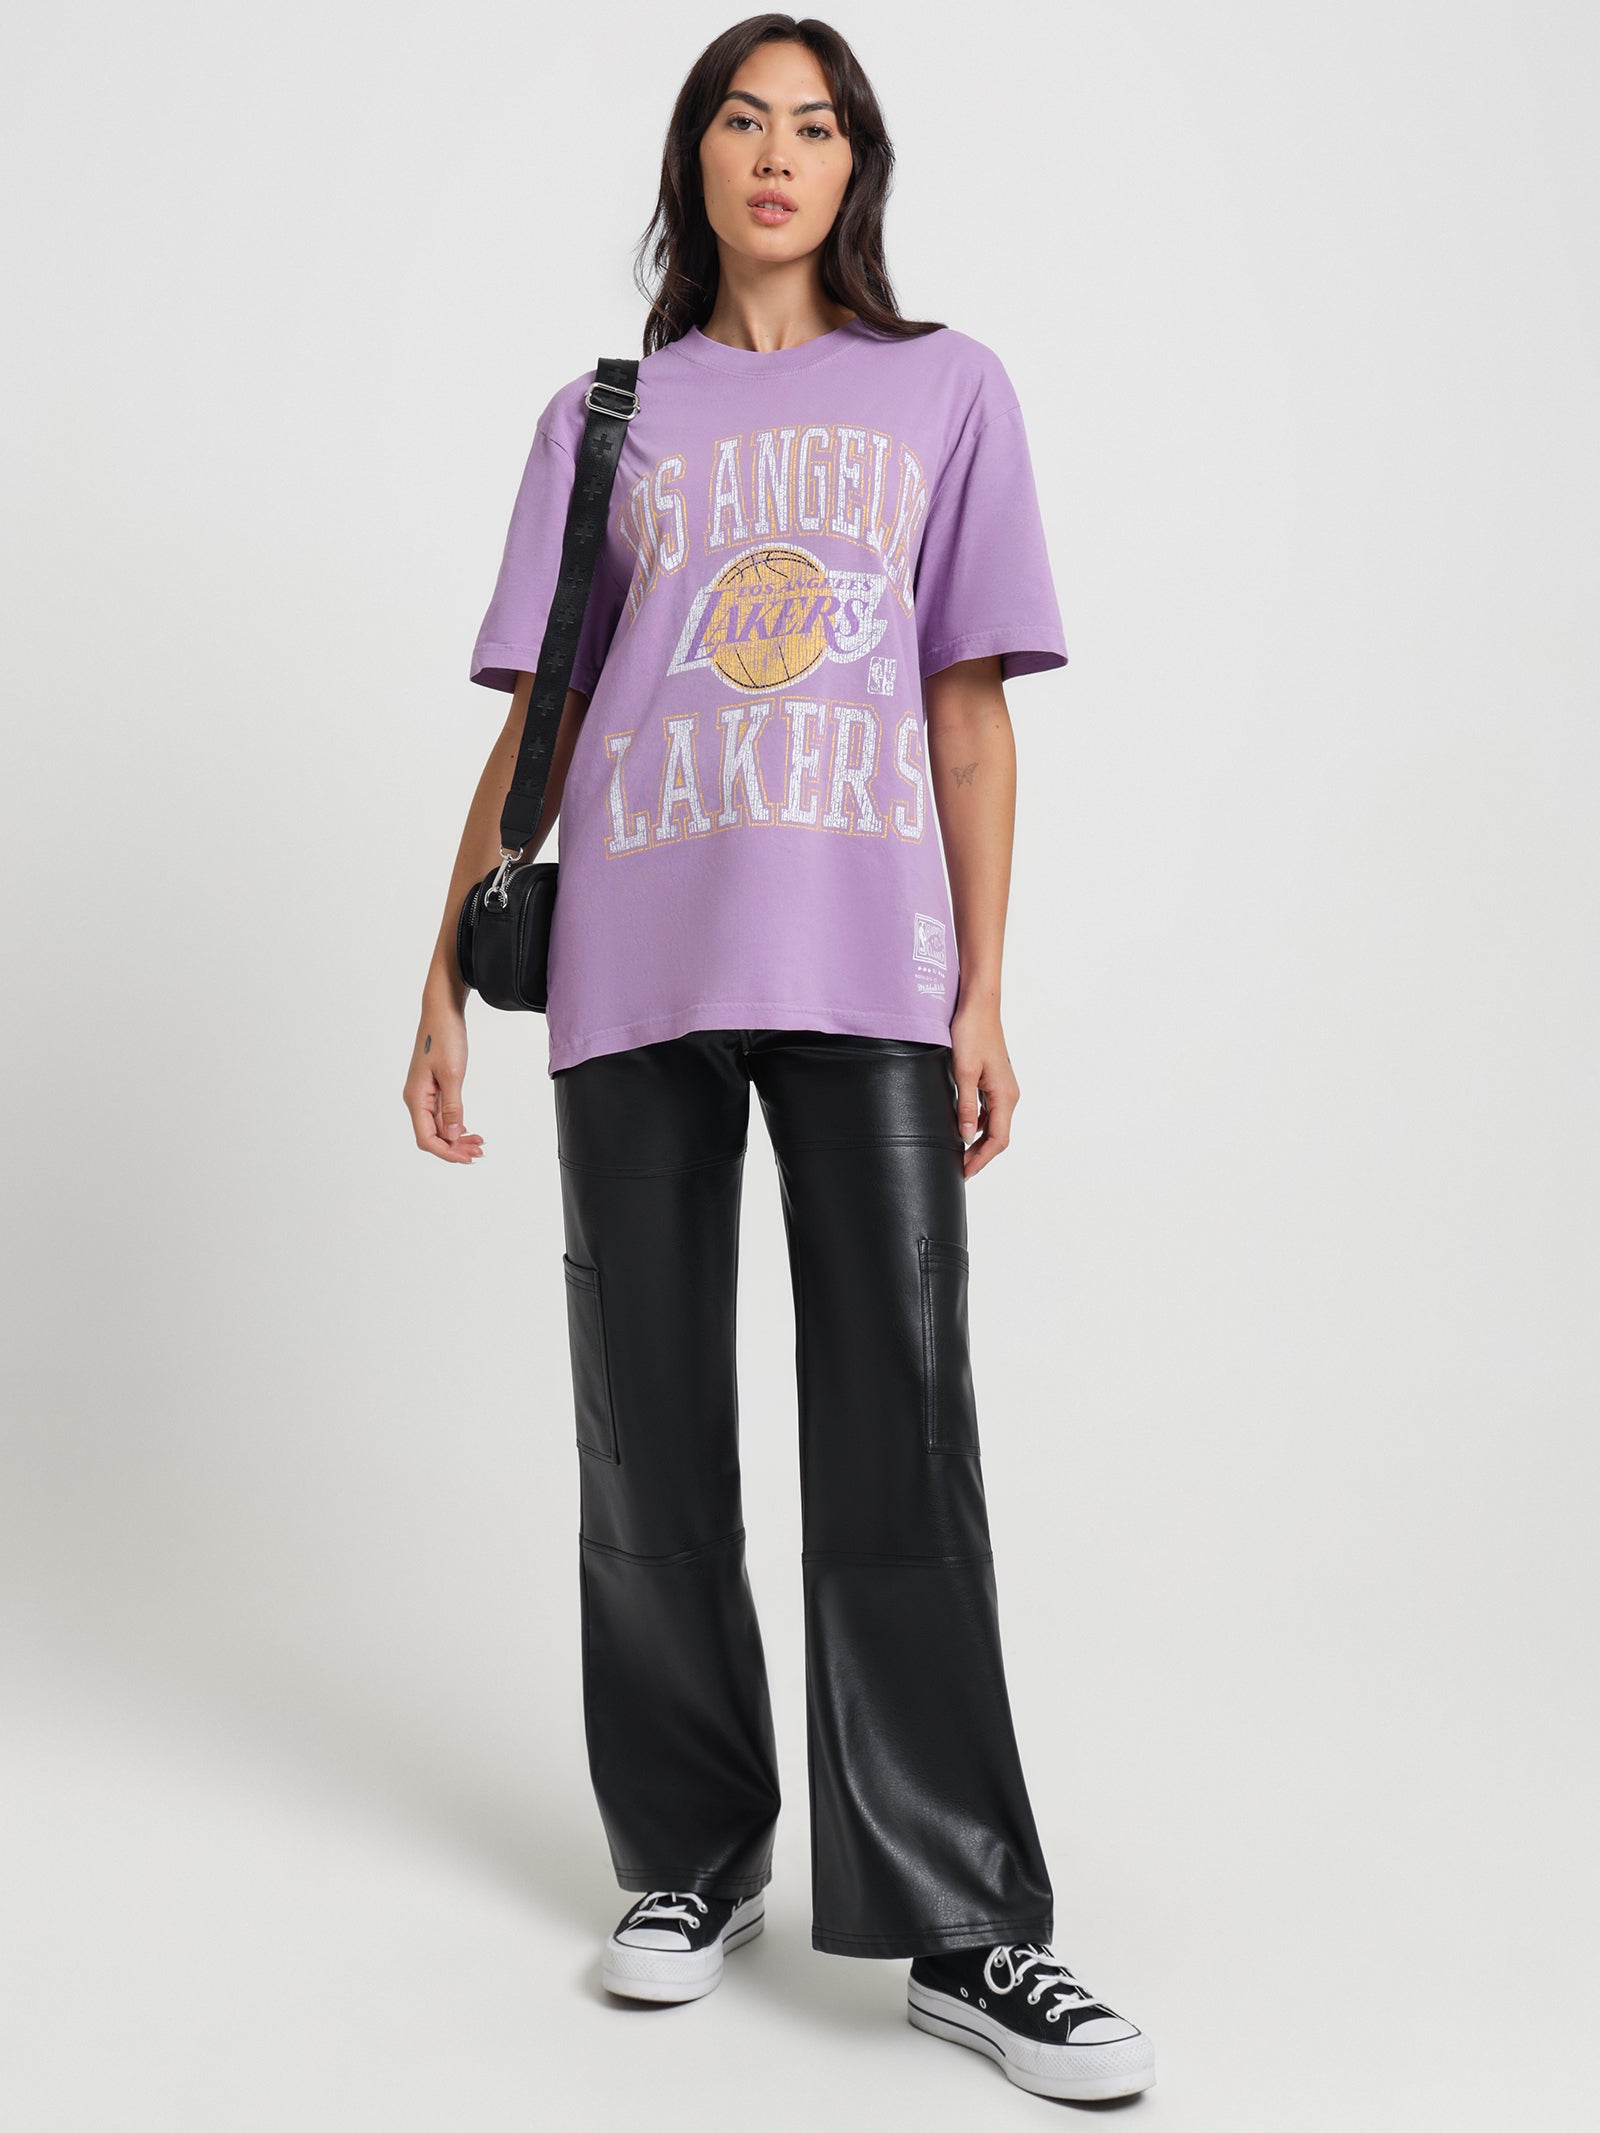 Mitchell & Ness Women's Los Angeles Lakers Big Face 5.0 Crop Tank Top Purple - Size 10 (M)